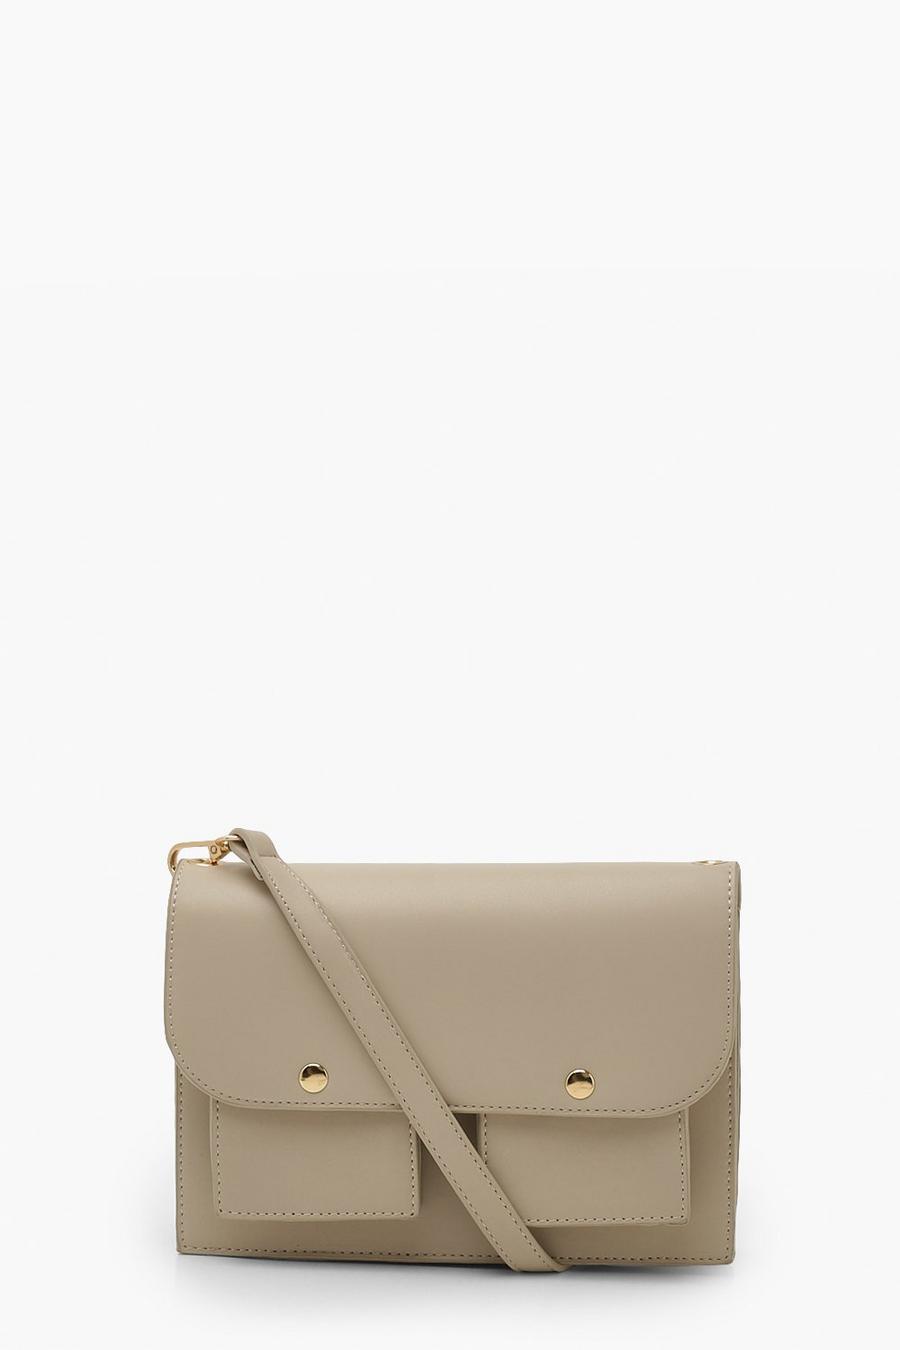 Taupe Satchel Cross Body Bag image number 1